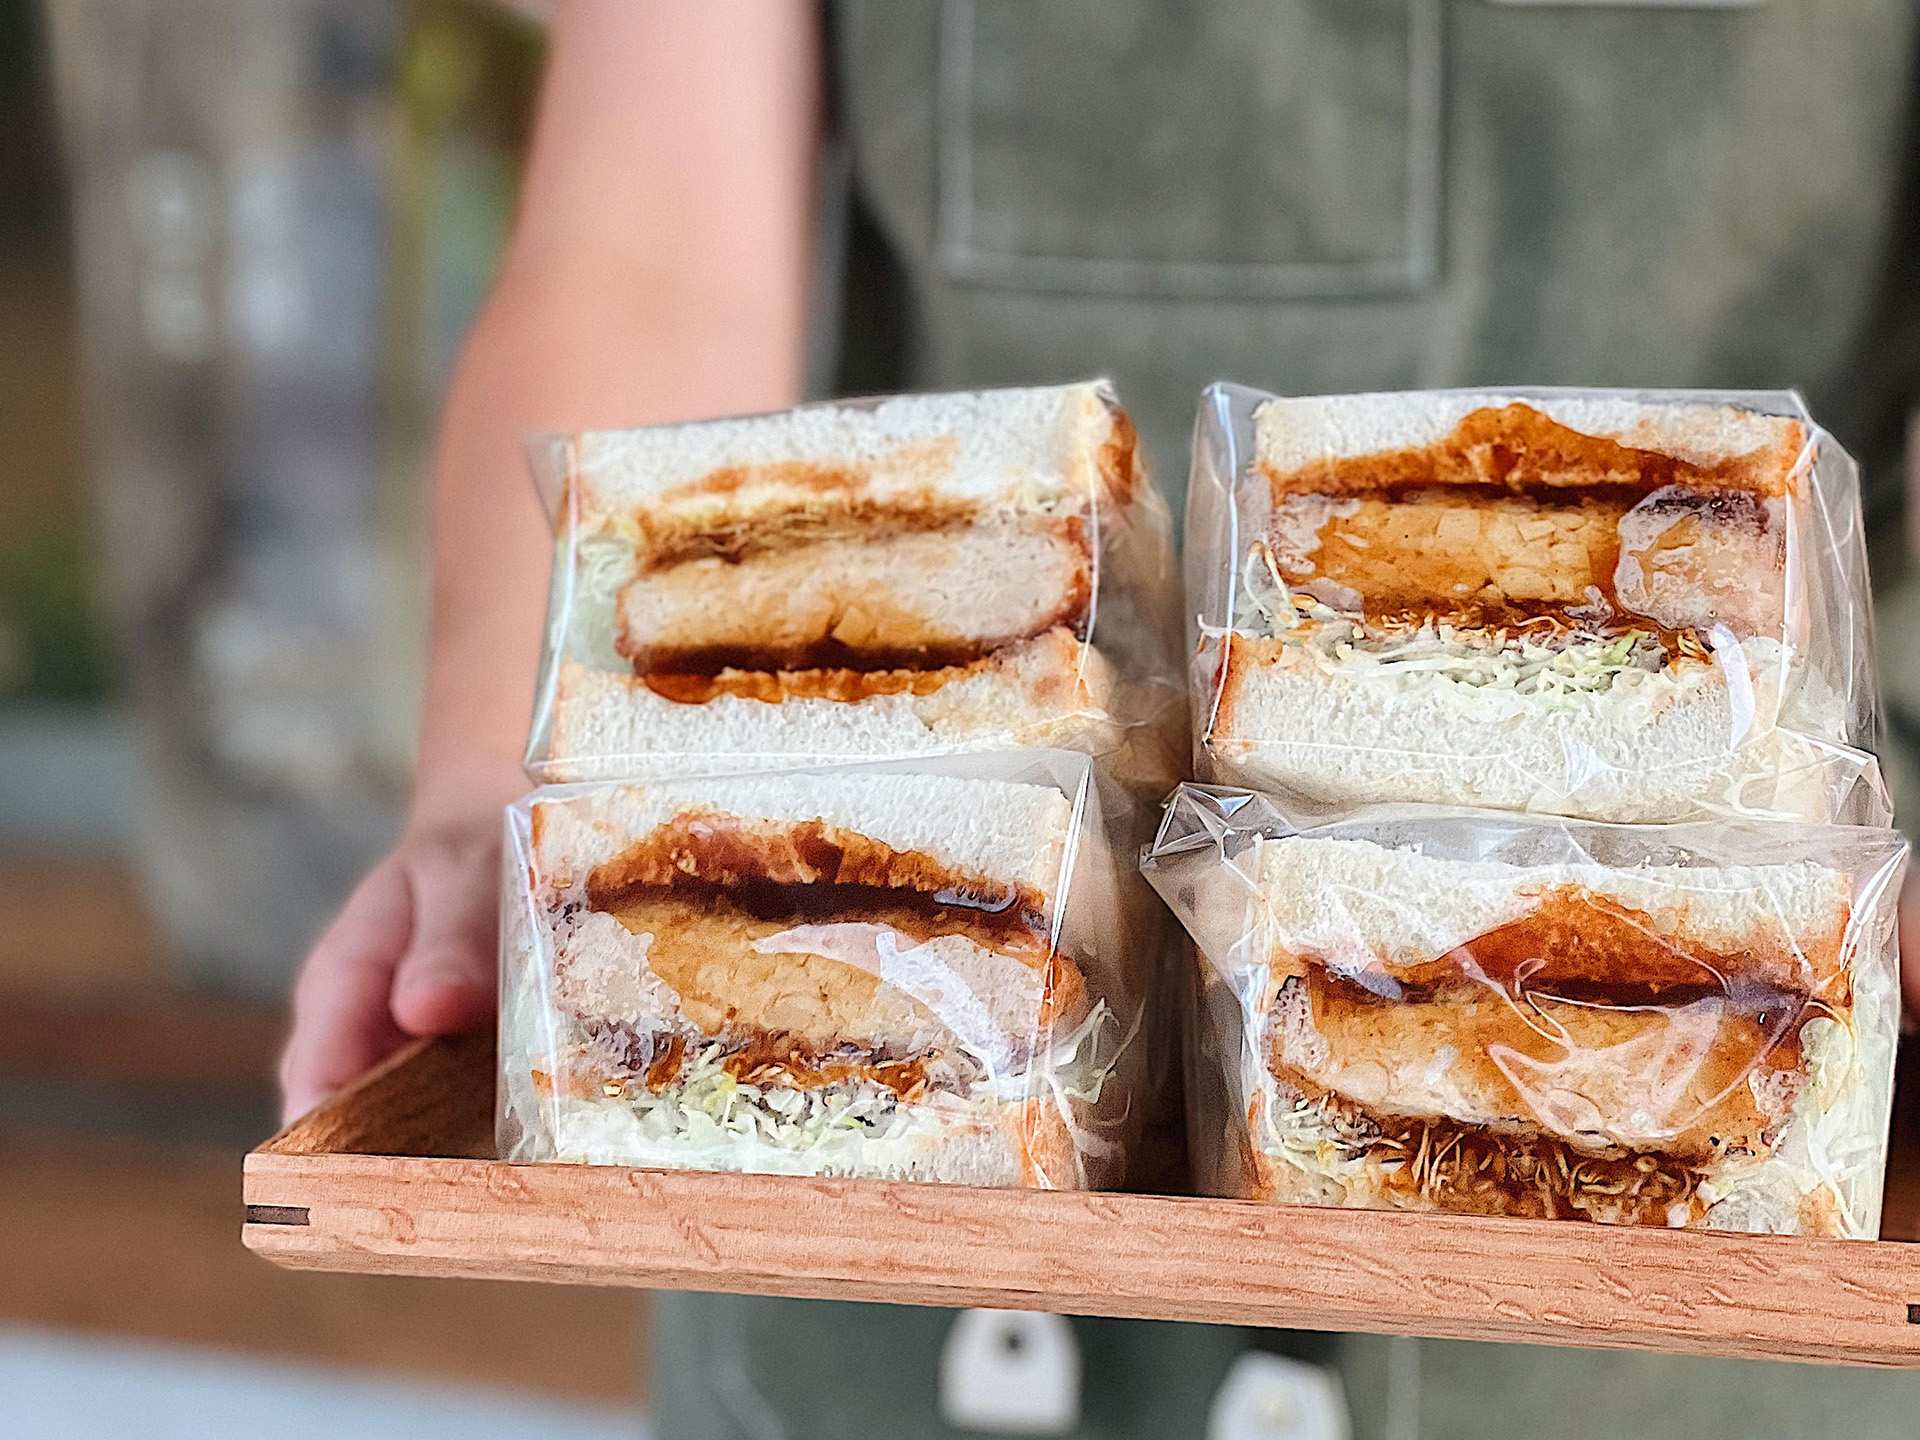 The best vegan cafes and bakeries in Toronto | Karepan sandwiches at Tsuchi Cafe